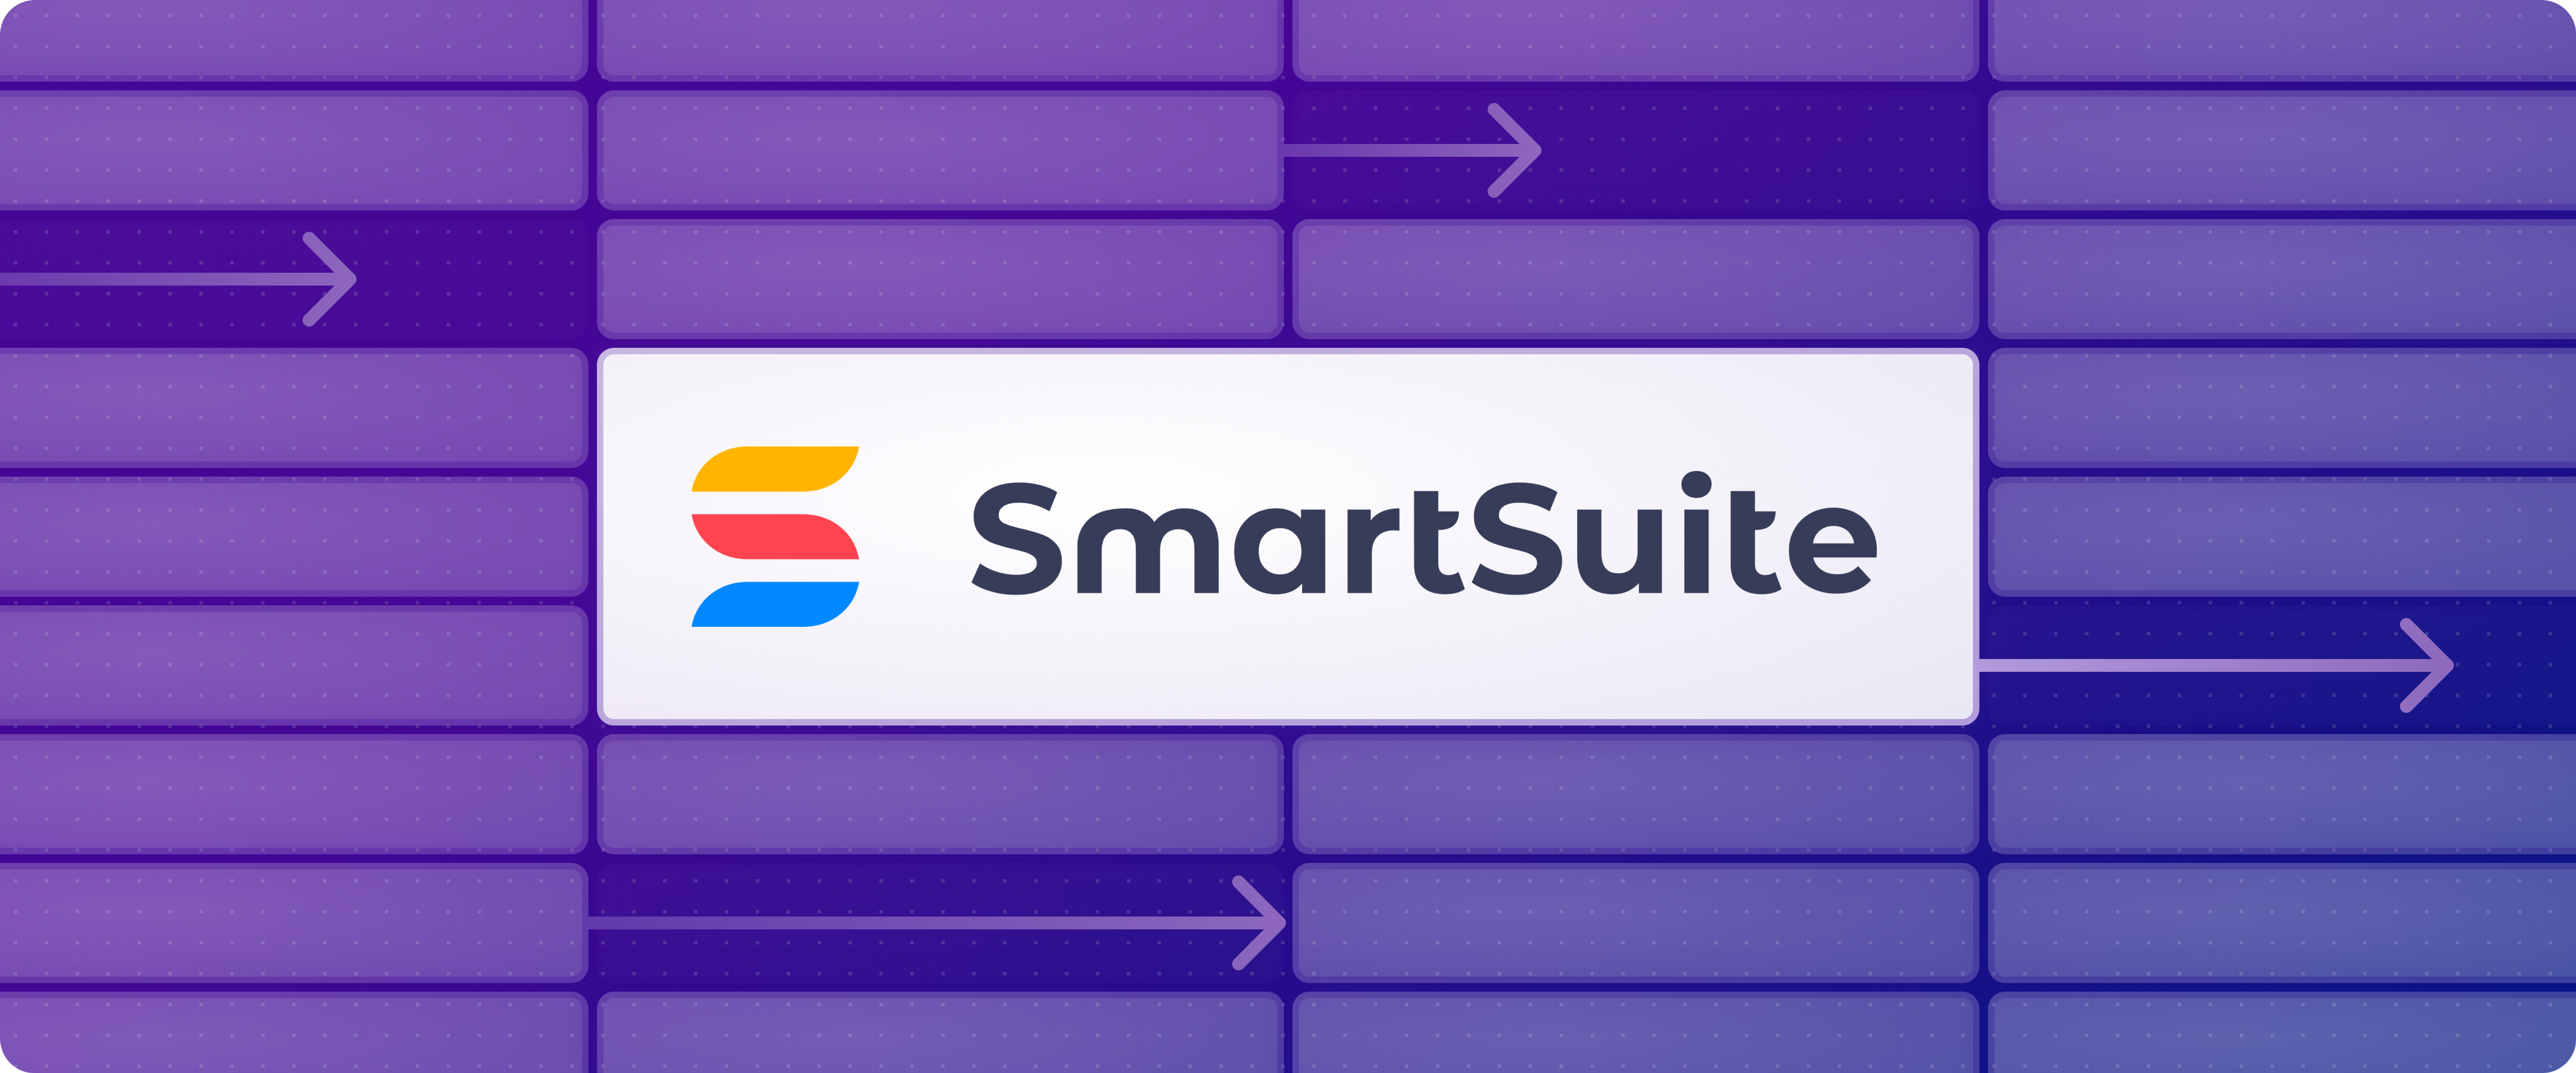 Decorative banner with SmartSuite logo